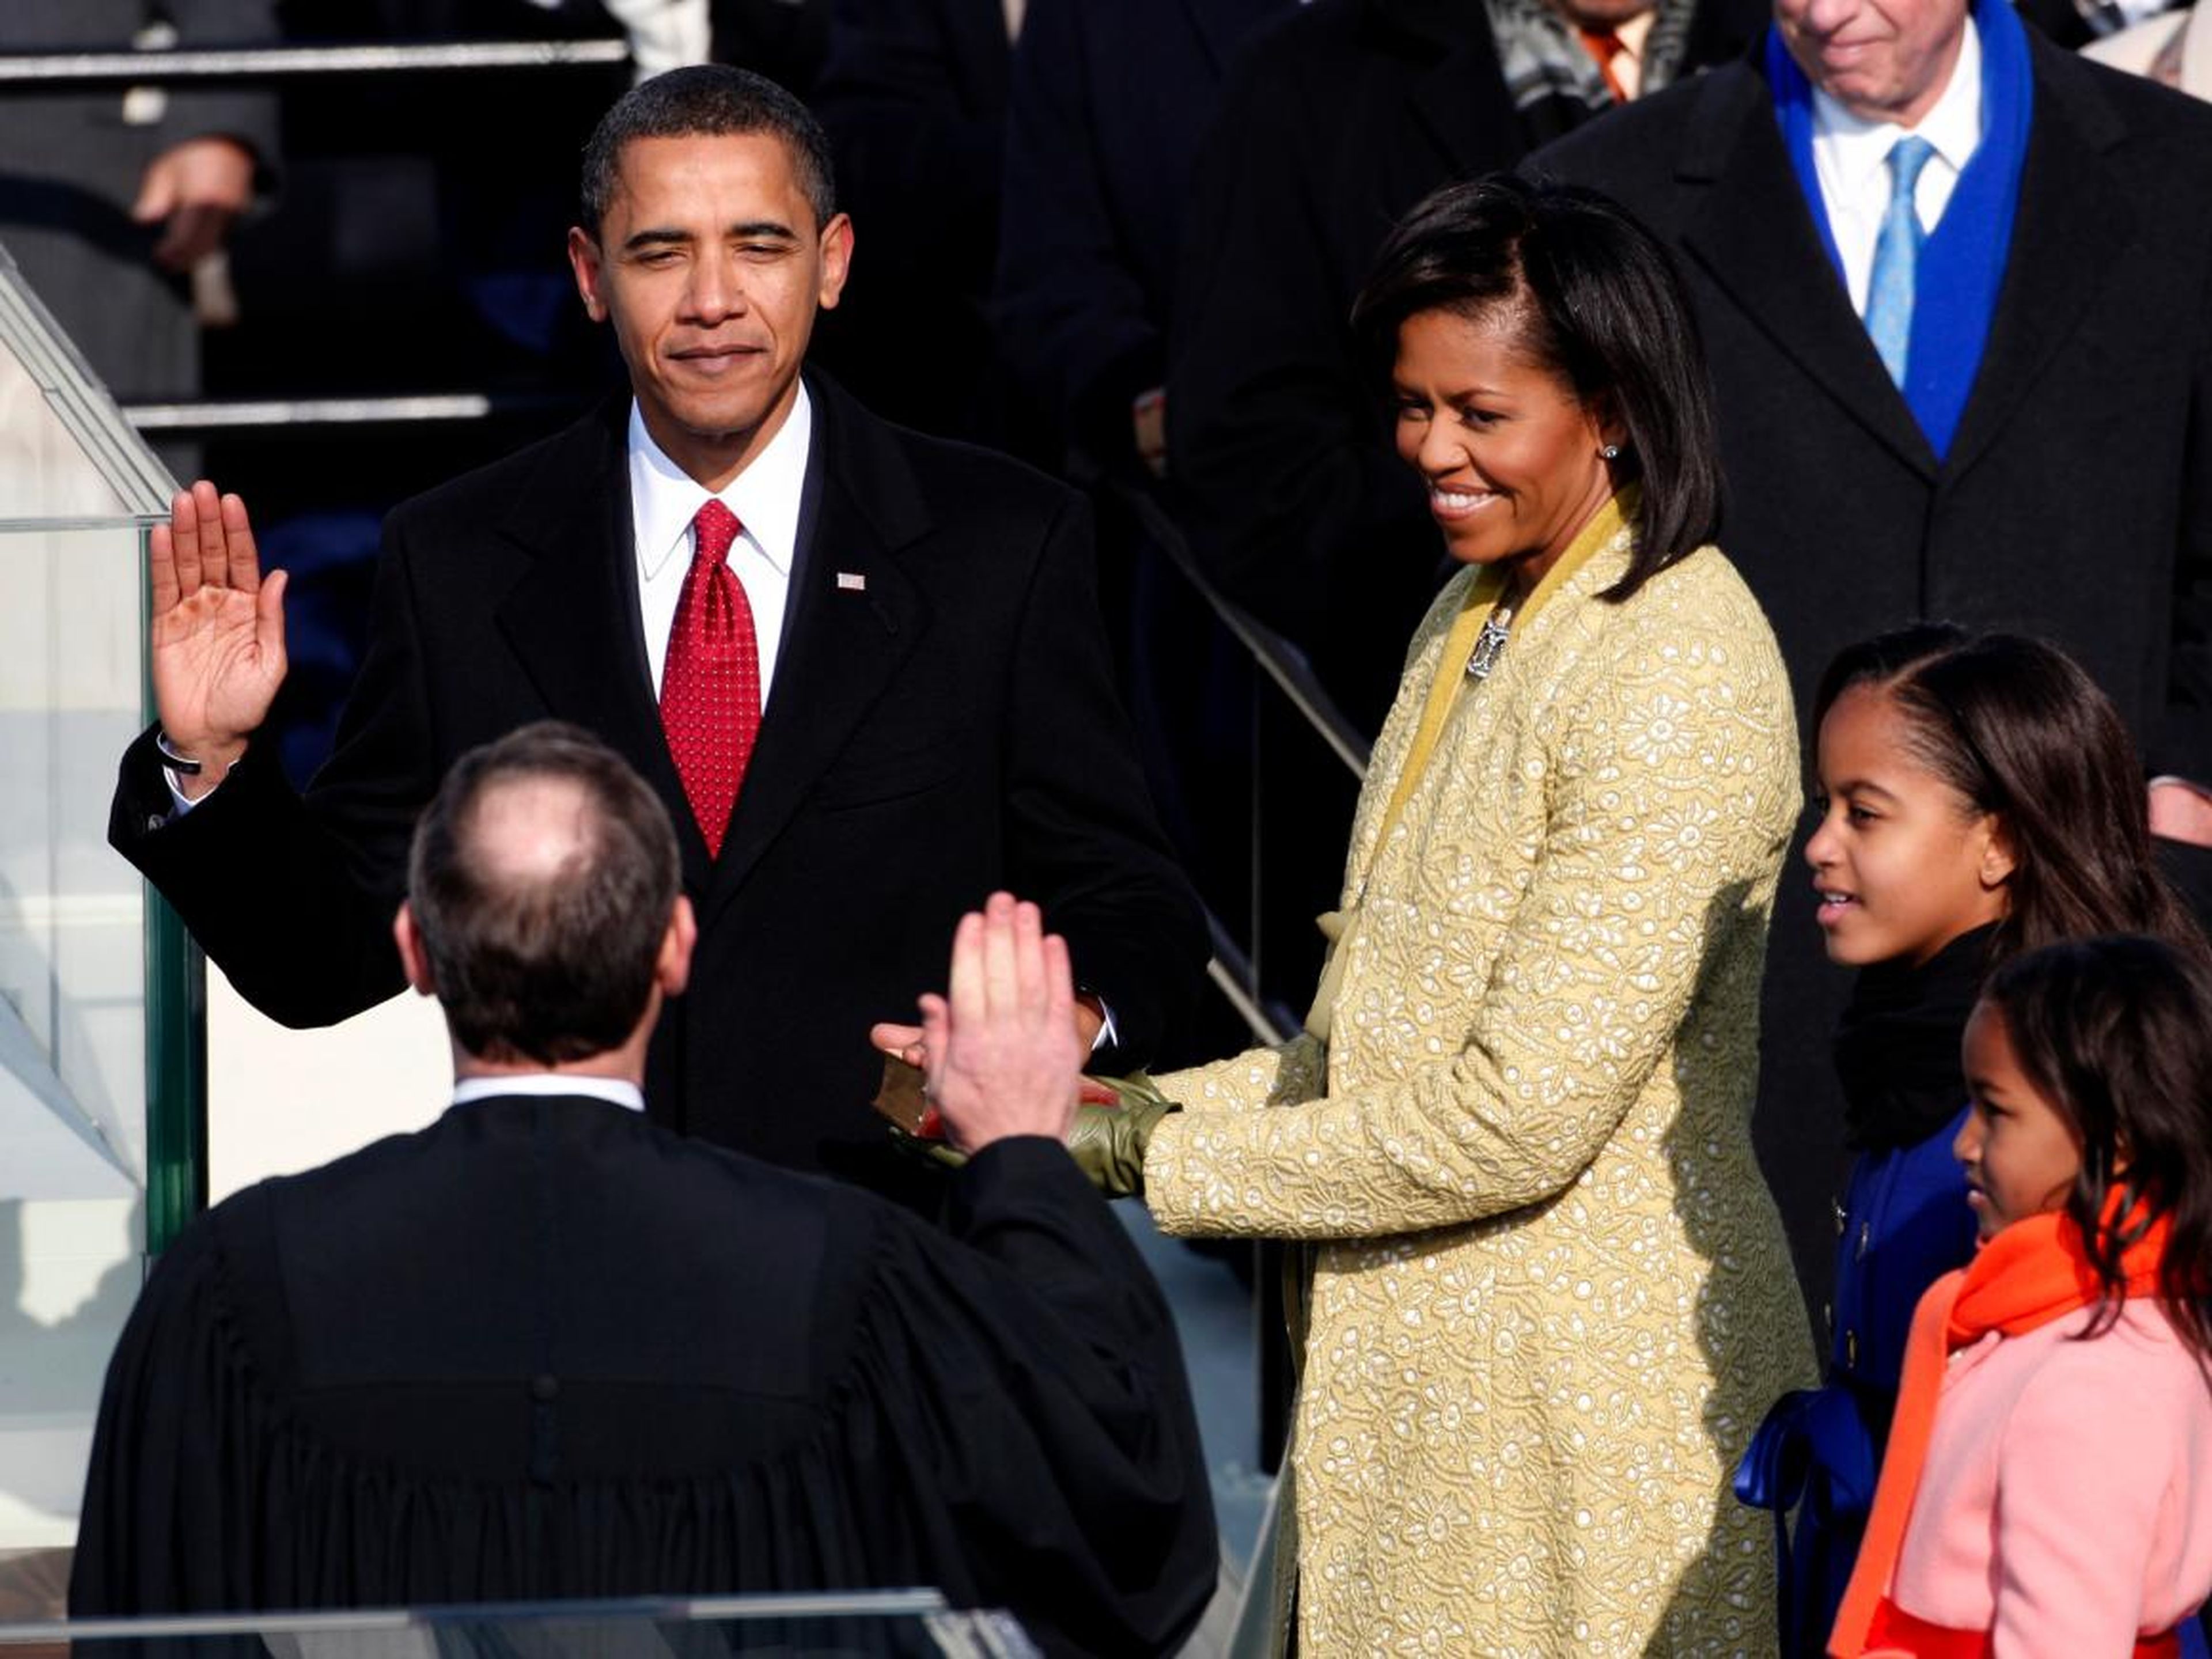 Obama looked youthful when he took the oath of office on Inauguration Day, January 20, 2009.